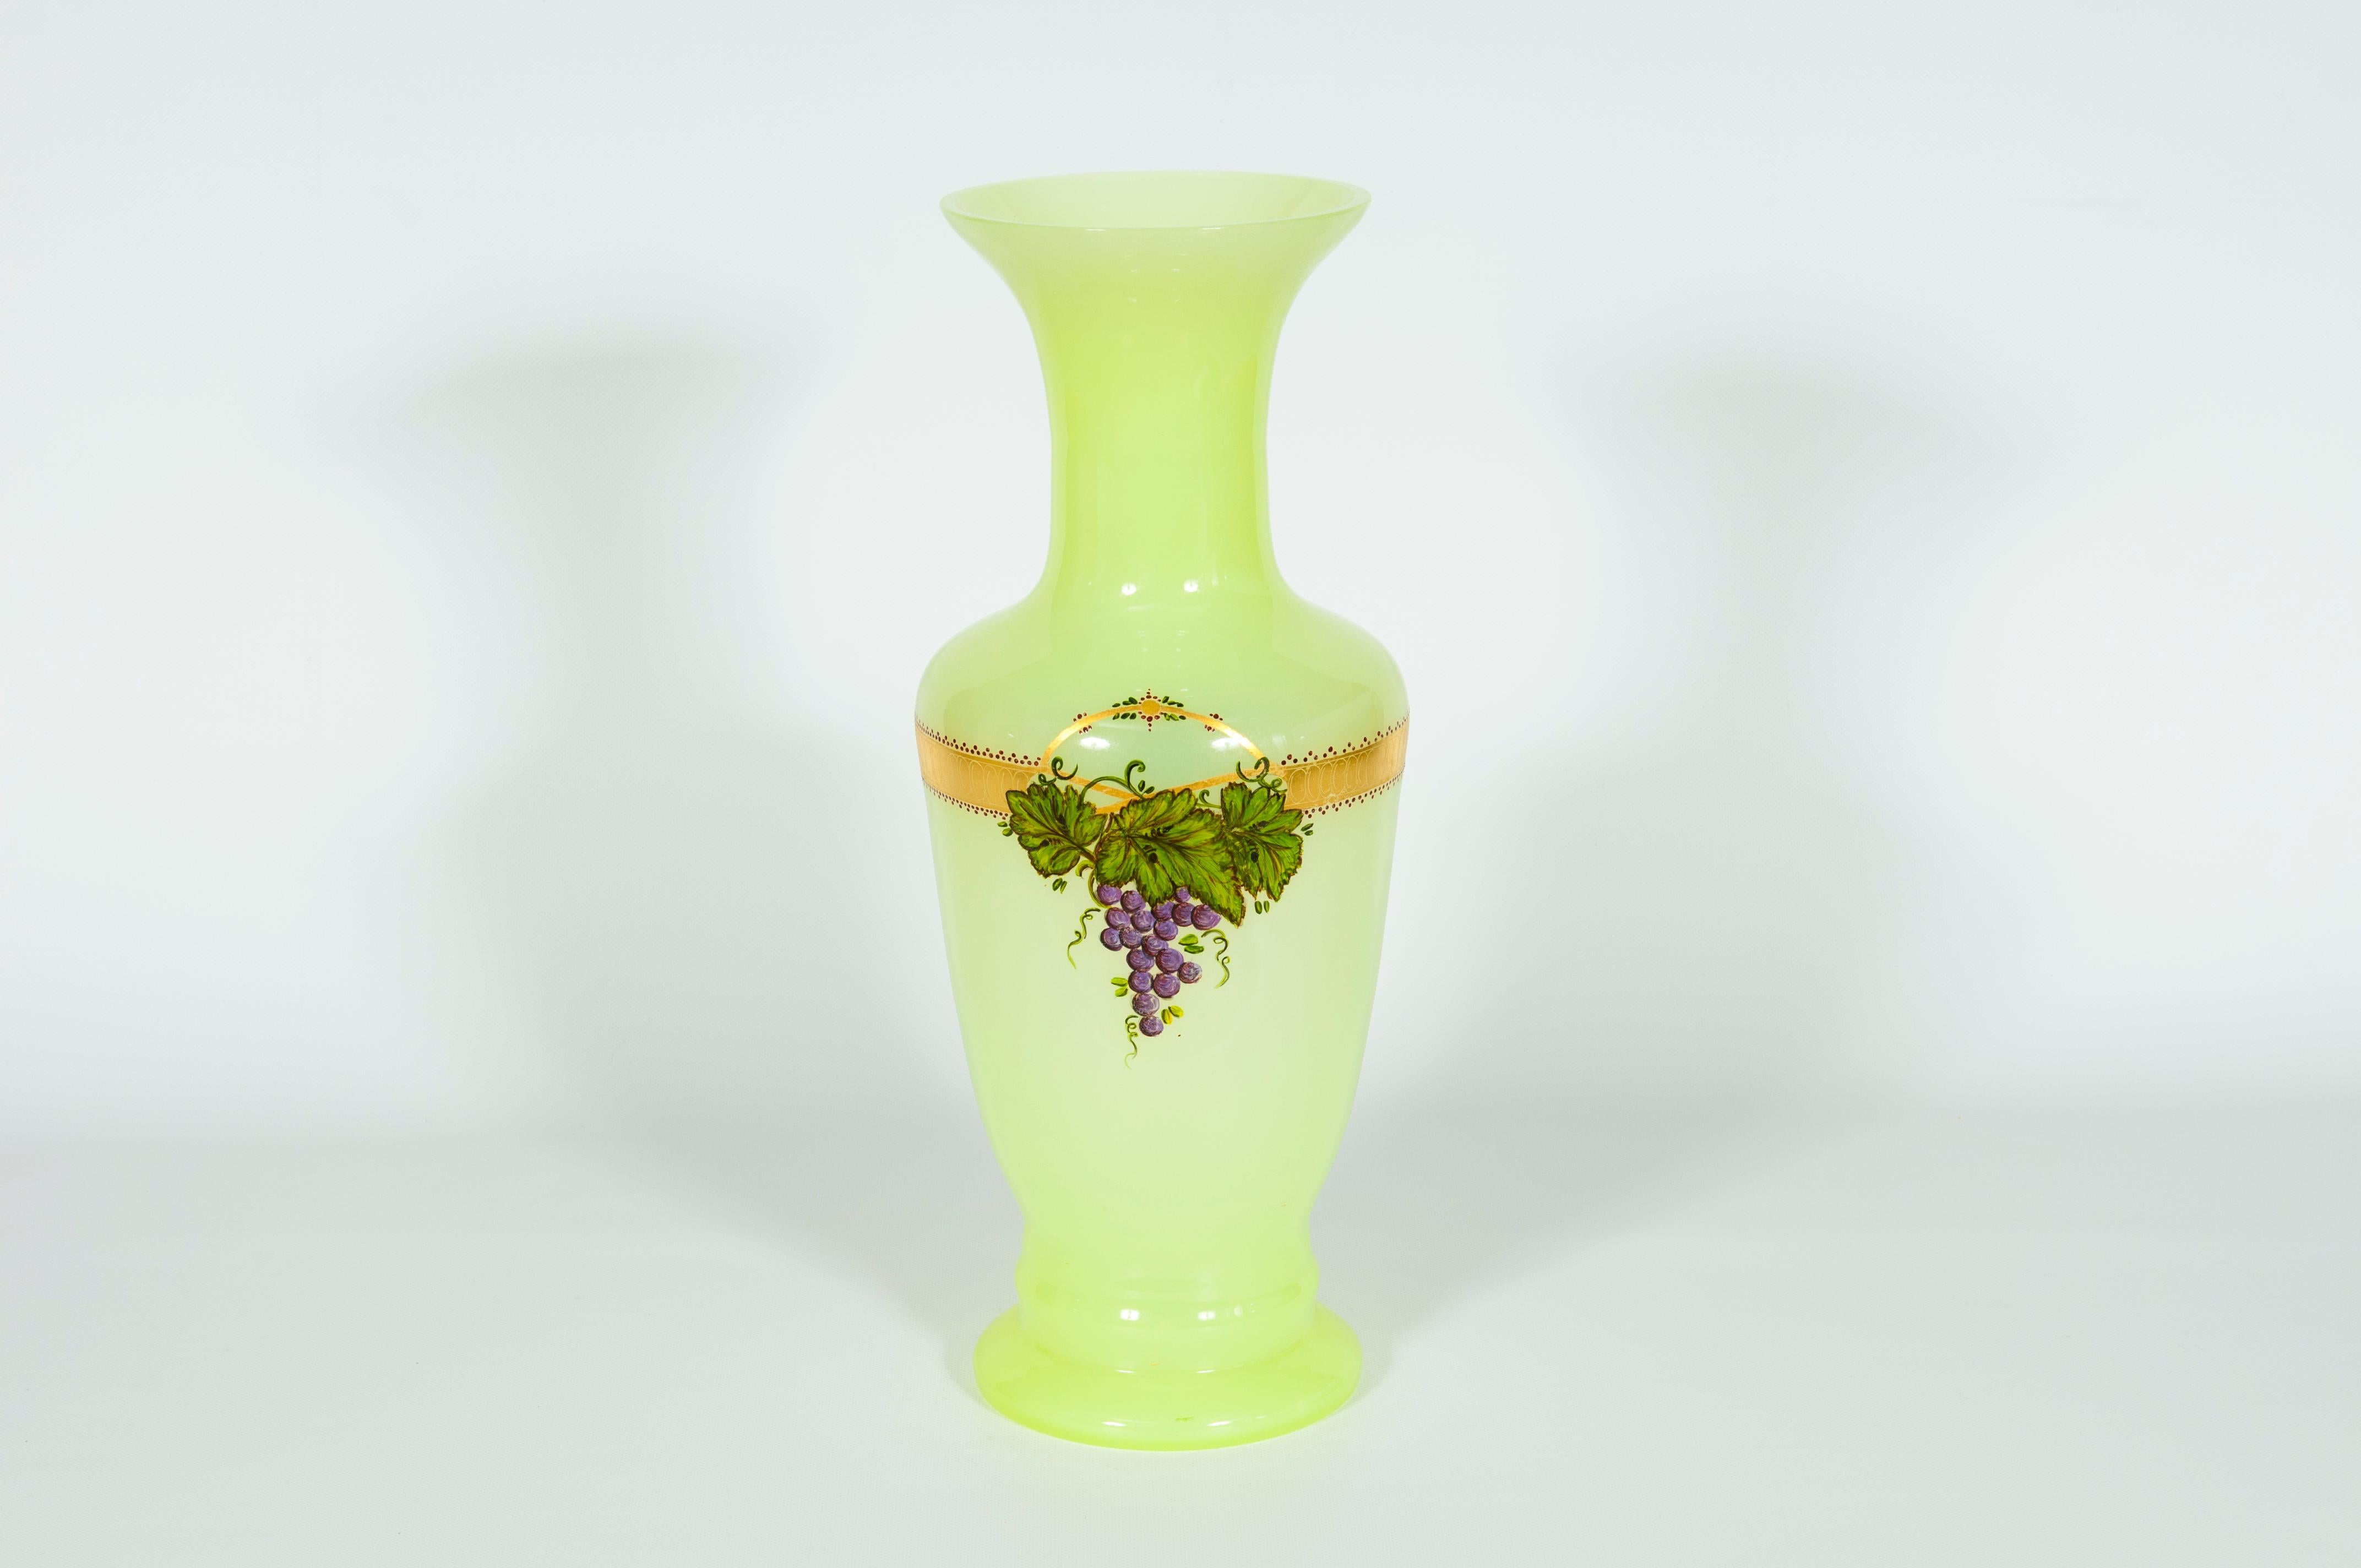 Pair of Fluorescent Yellow Murano Glass Vases Hand Painted and Decorated 1990s For Sale 6